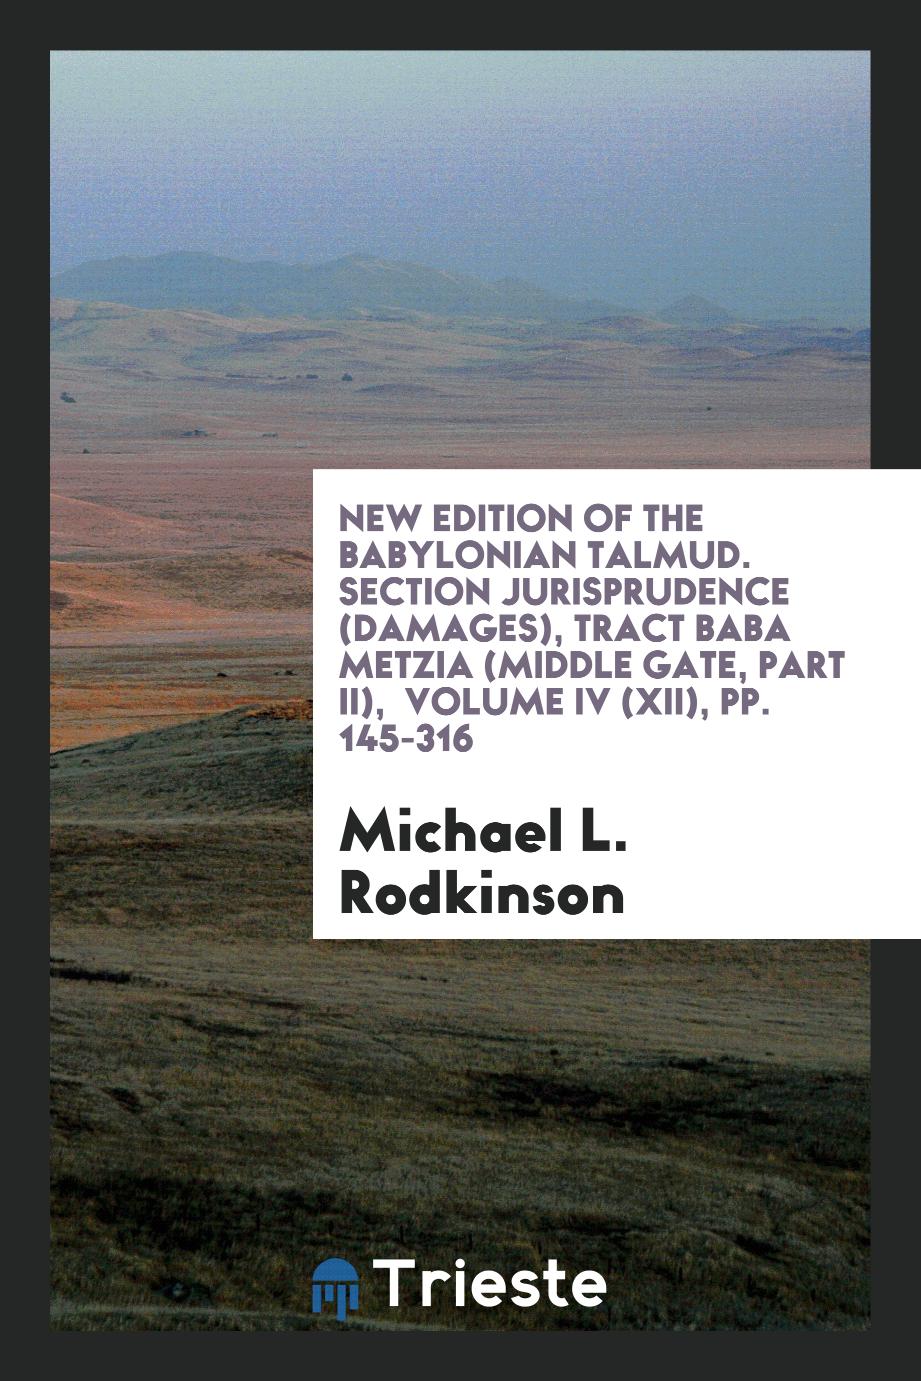 New Edition of the Babylonian Talmud. Section Jurisprudence (Damages), Tract Baba Metzia (Middle Gate, Part II), Volume IV (XII), pp. 145-316